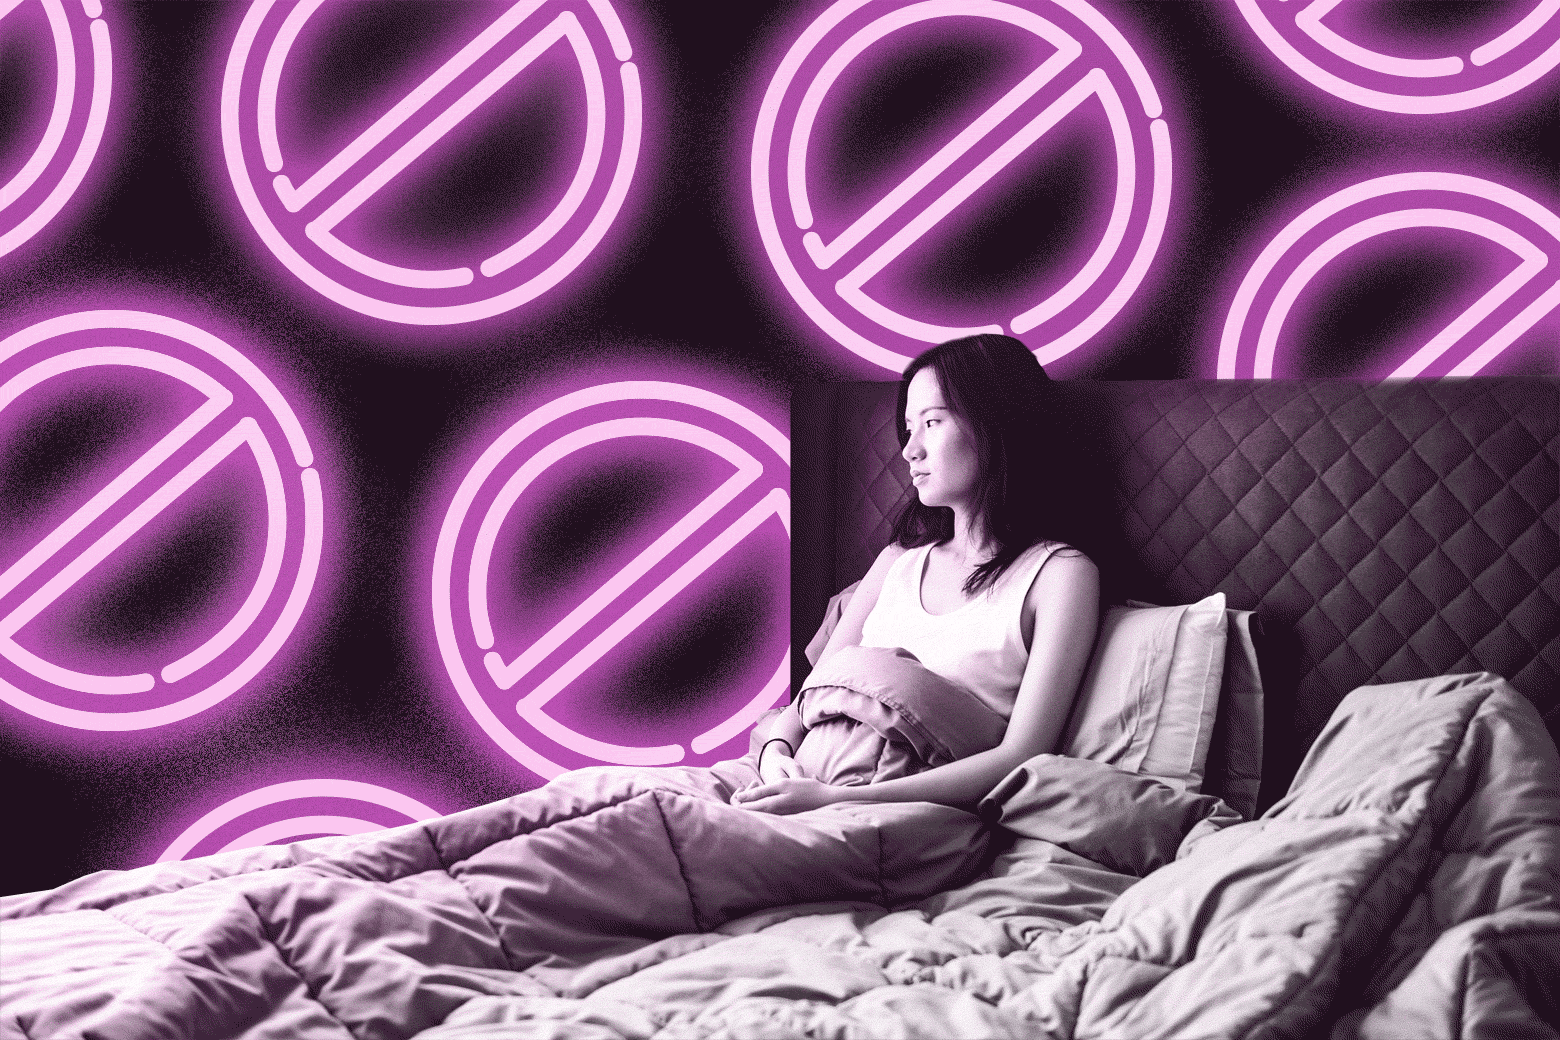 Photo illustration of a woman sitting up in an otherwise empty bed.